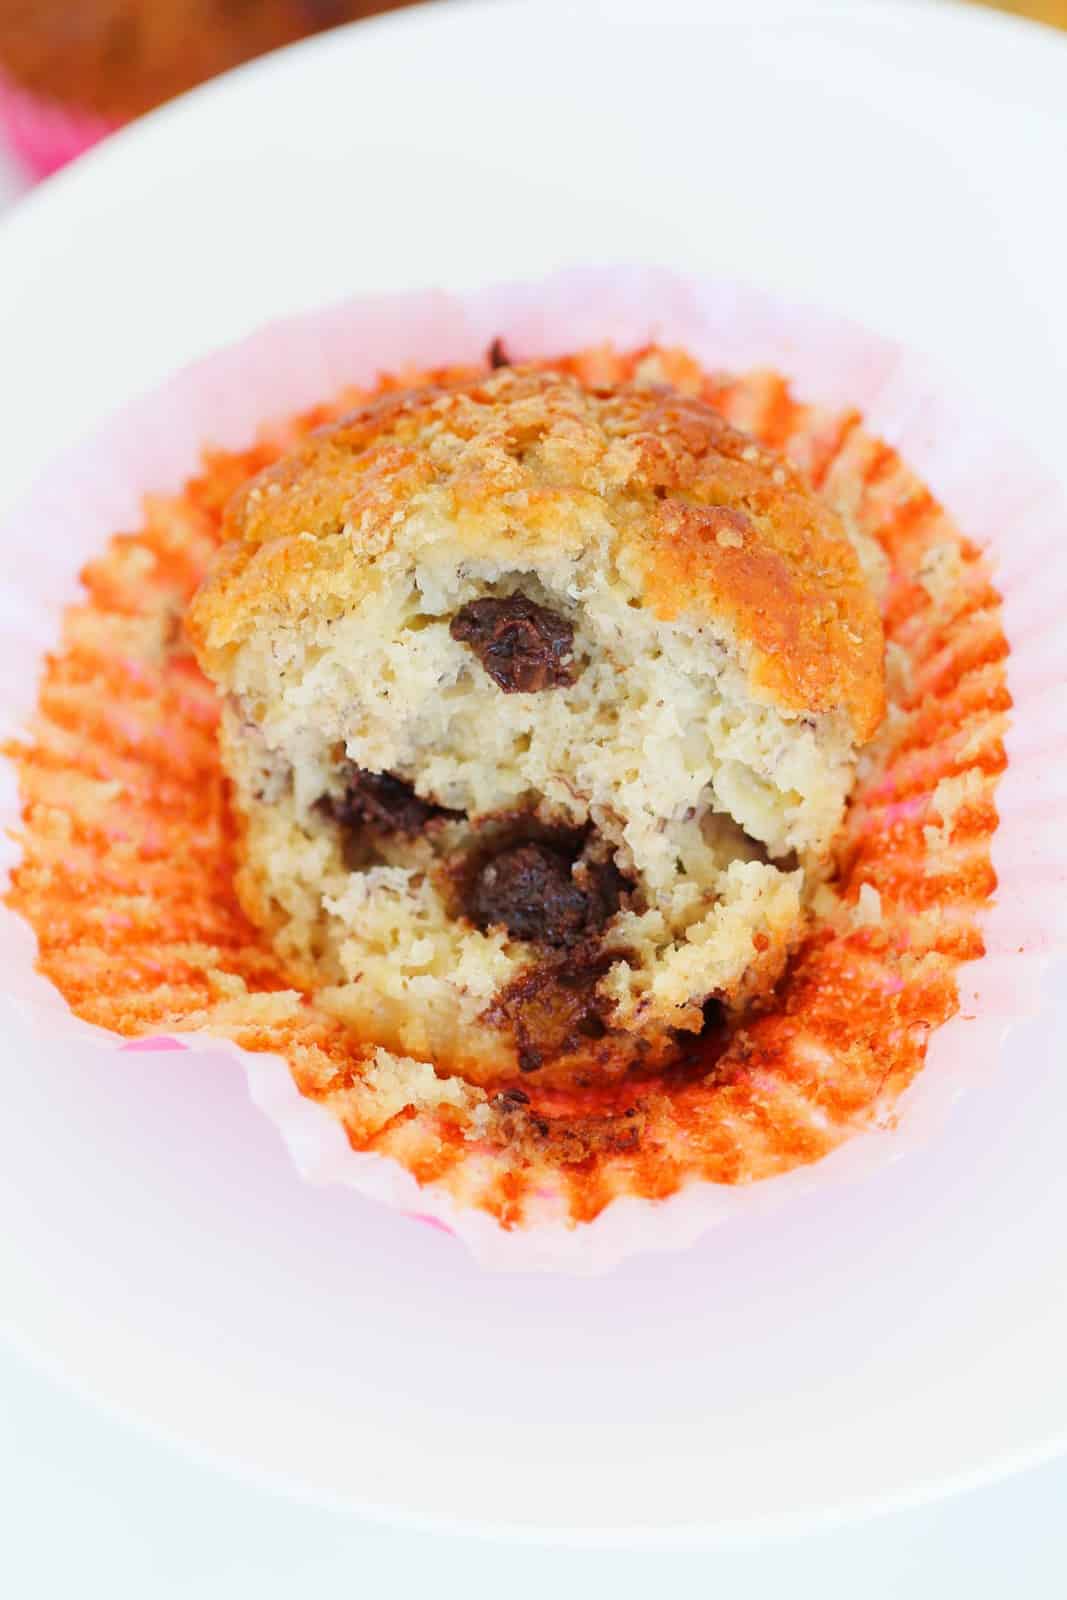 A soft and fluffy banana muffin with dark chocolate chips.